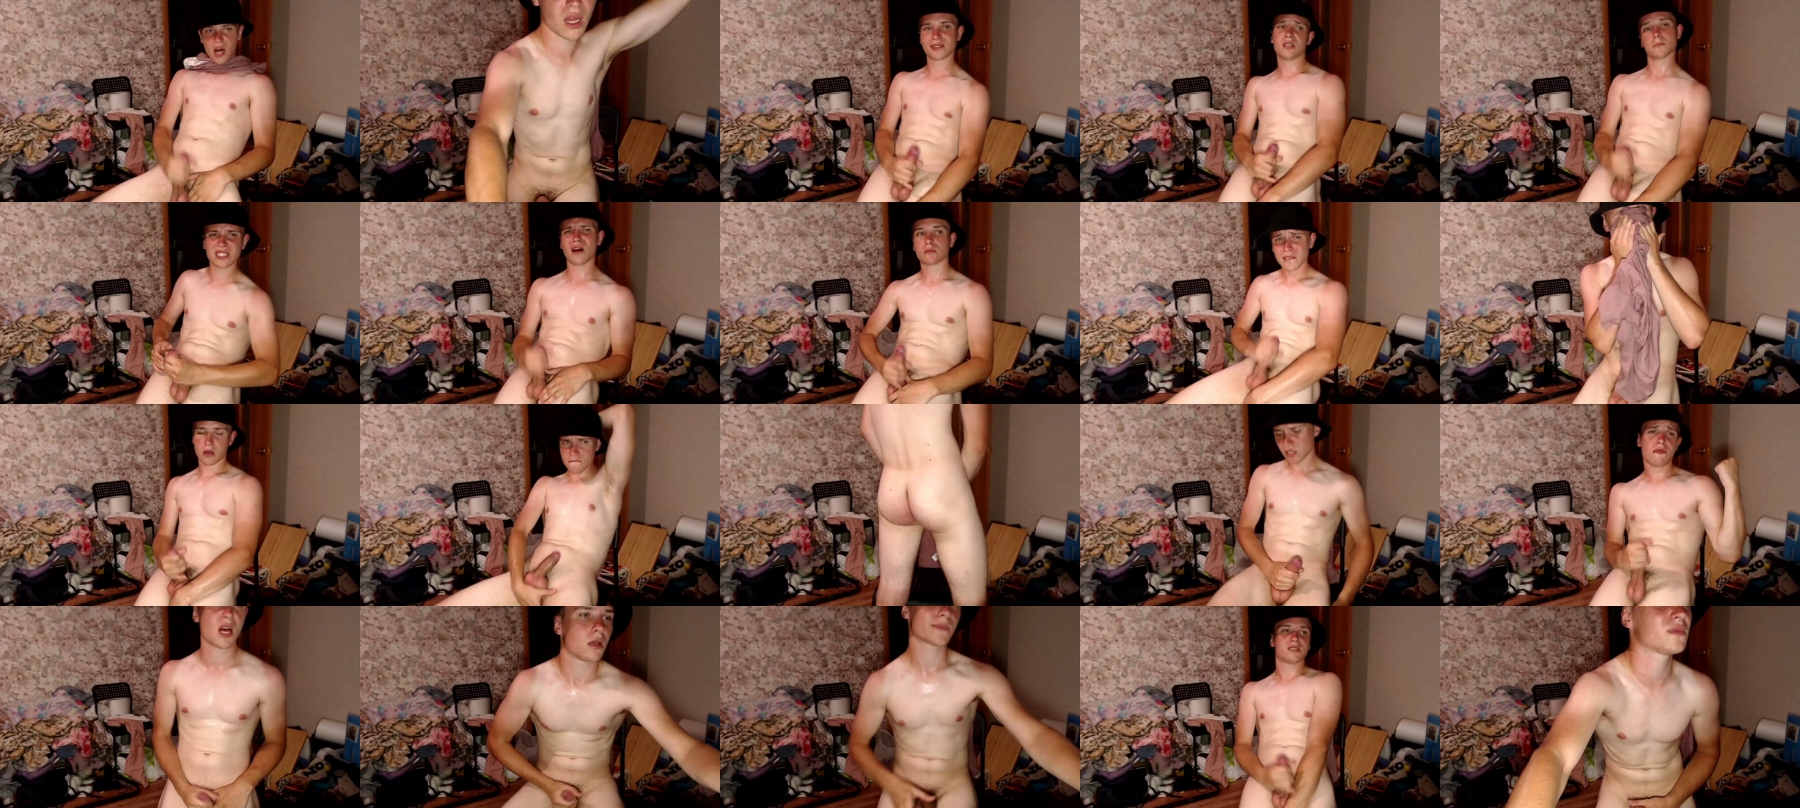 Russiantwink00  16-07-2021 Male Naked